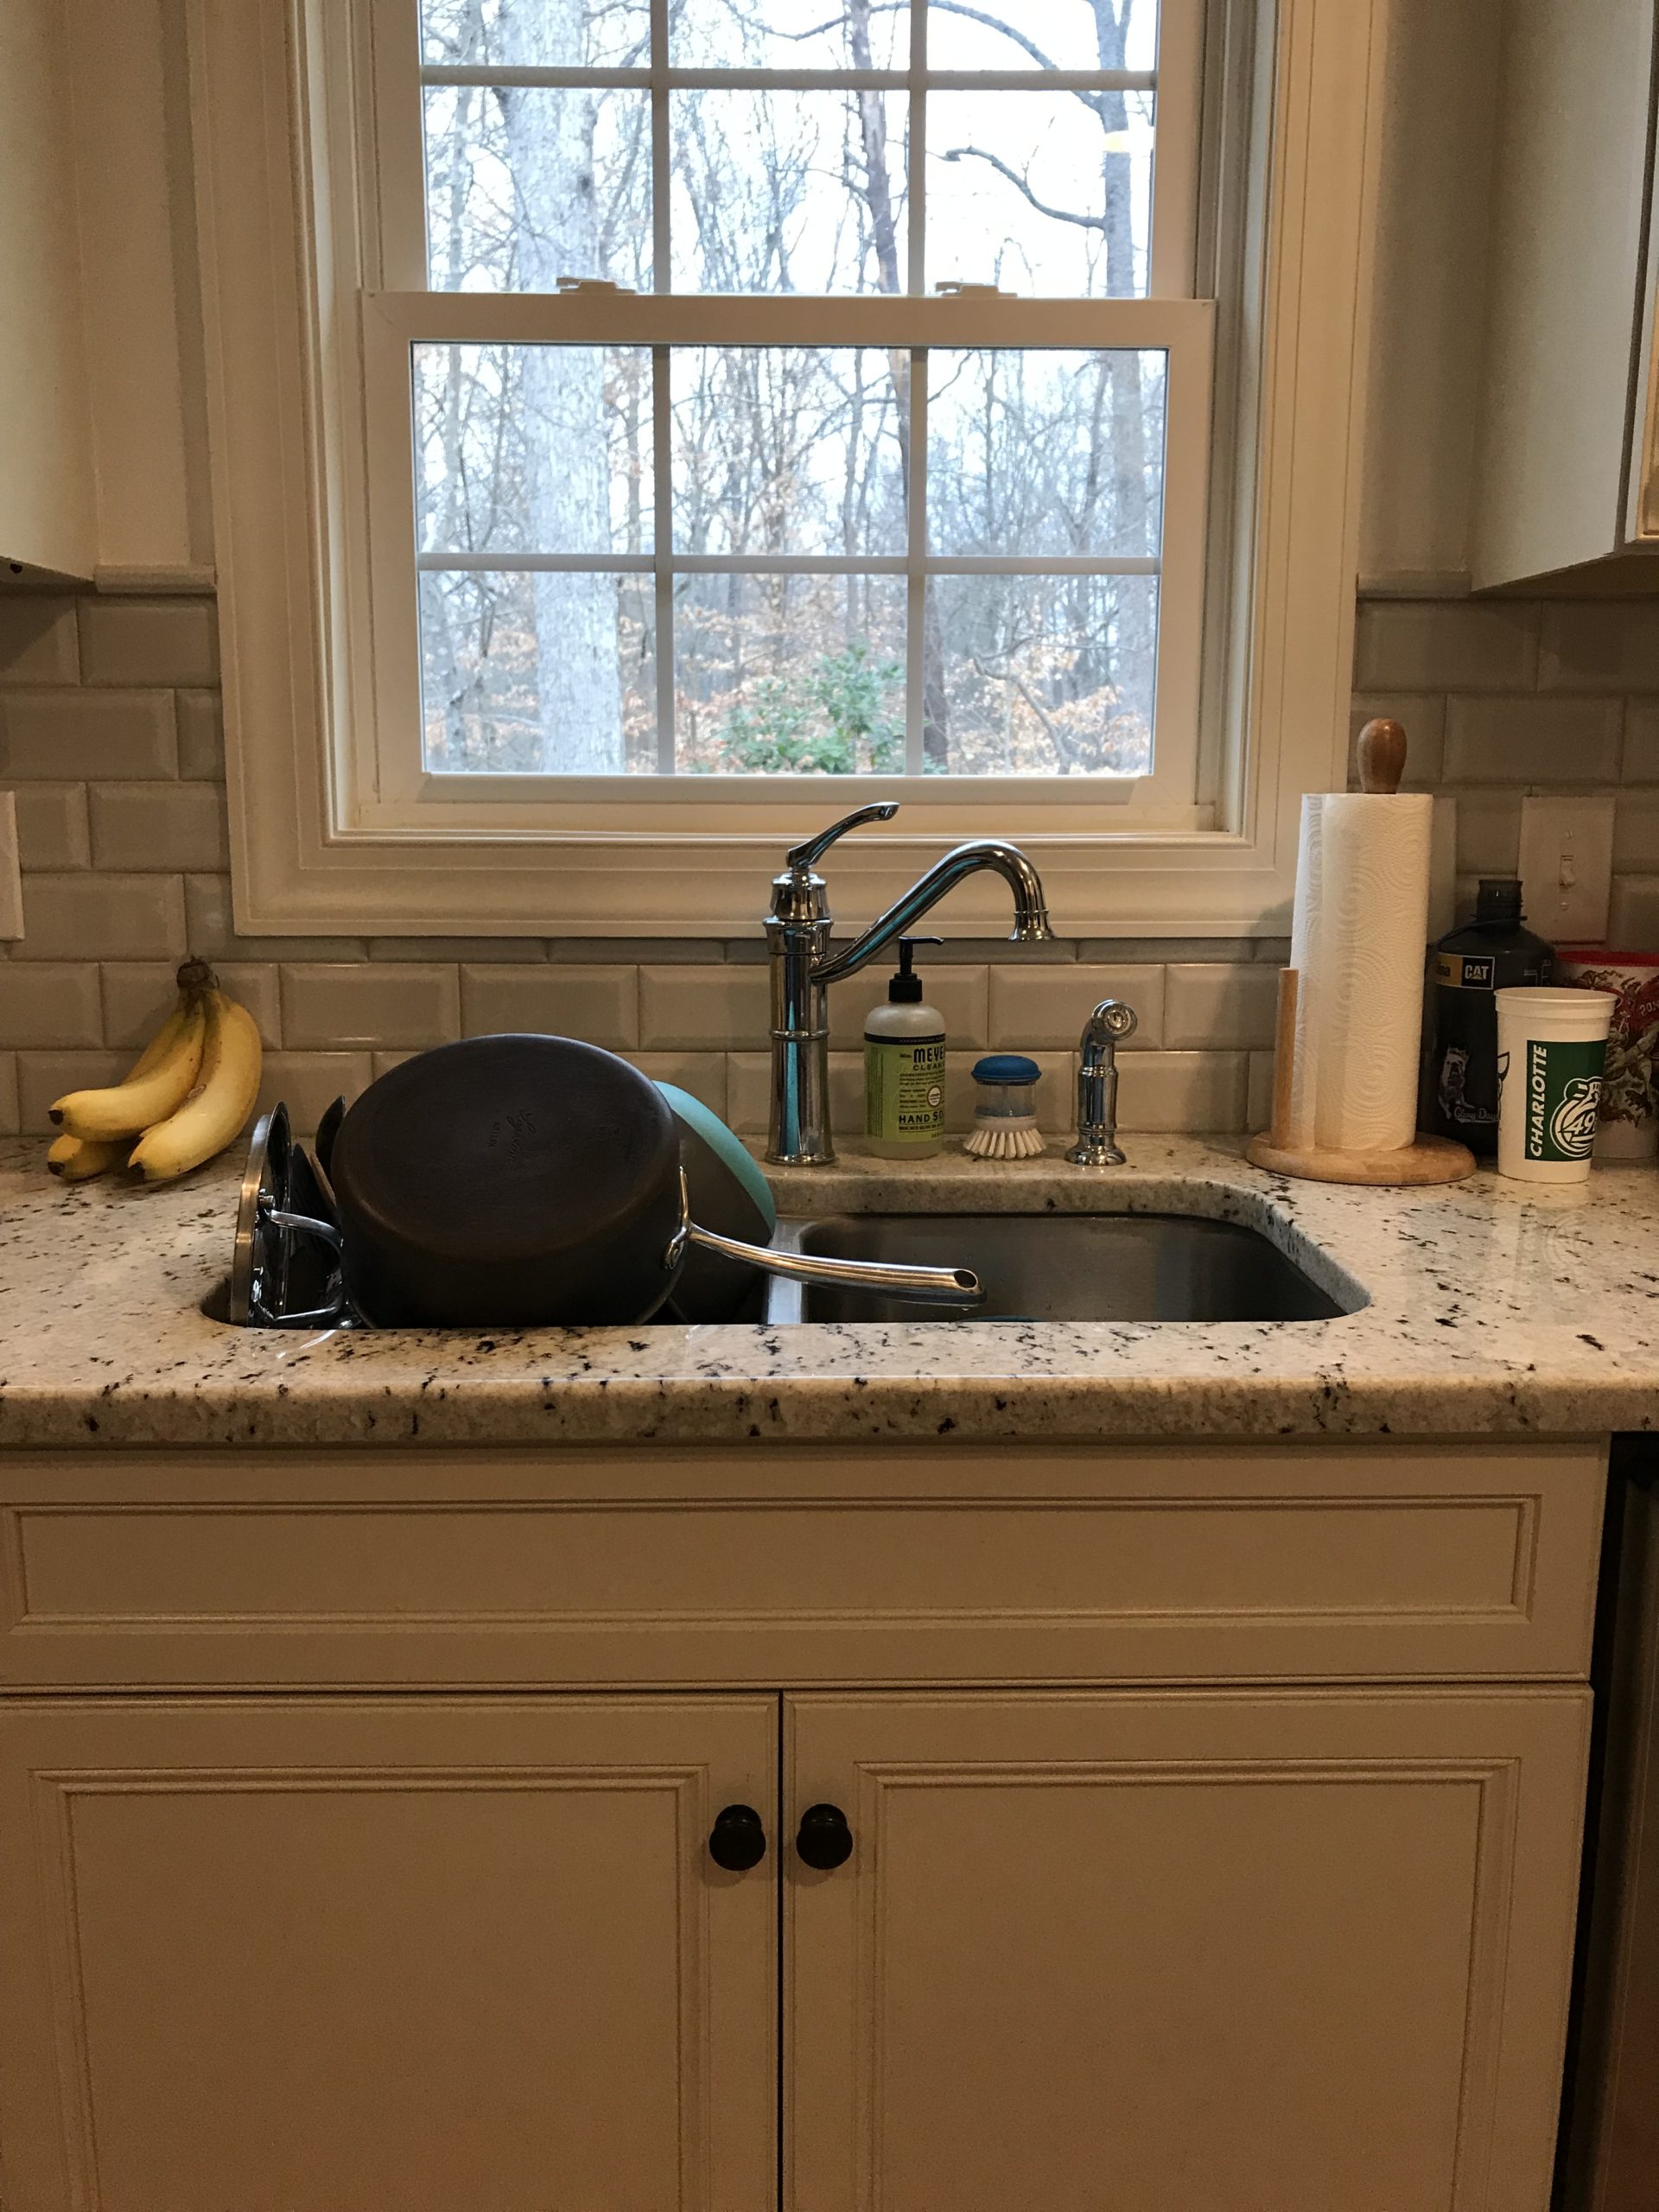 Before and After Kitchen Photos | Louella Reese